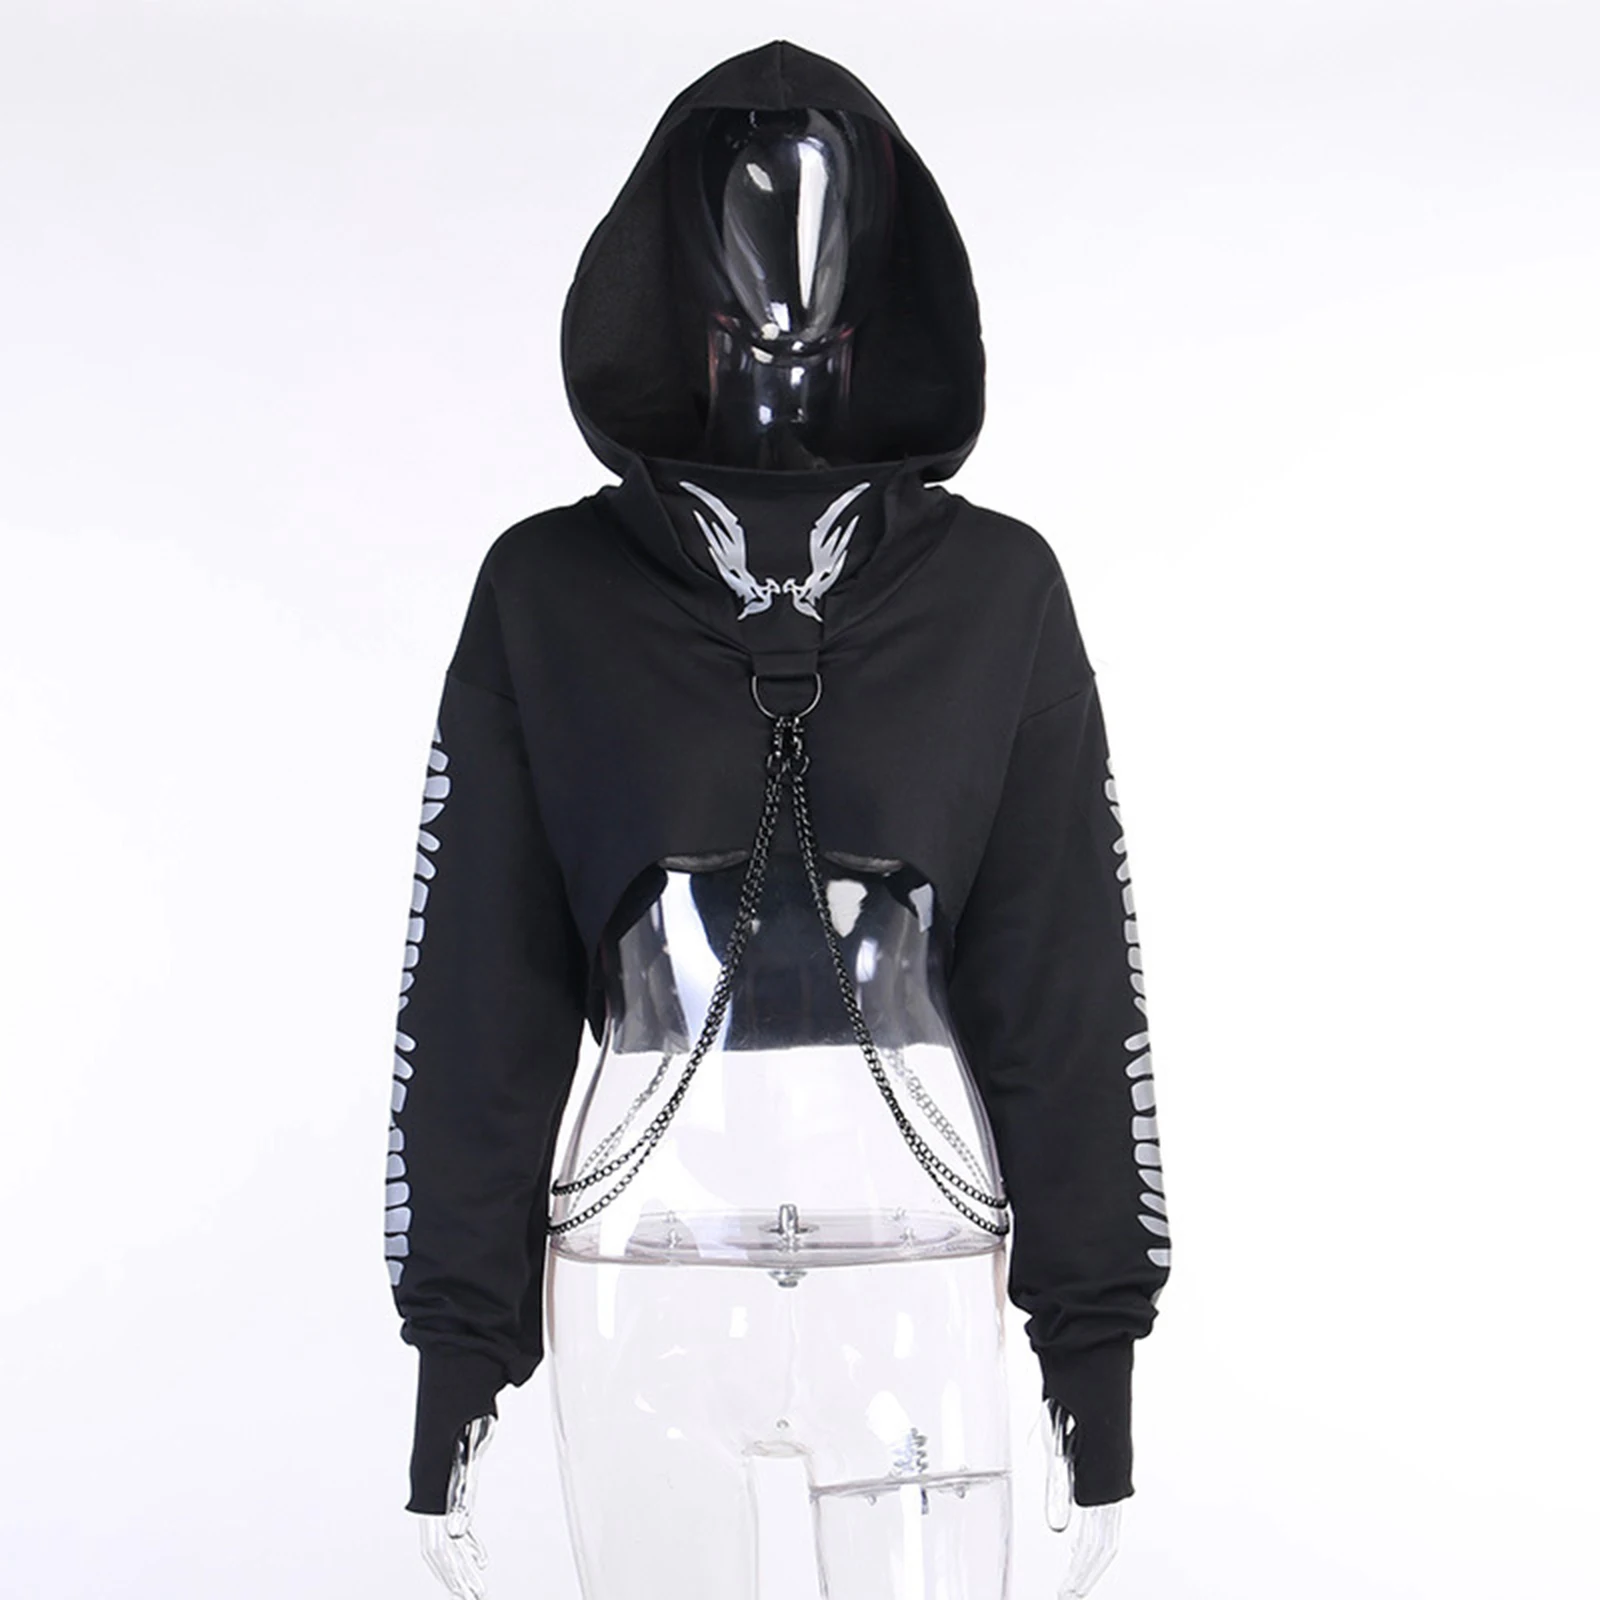 Women Gothic Reflective Print Hoodies Crop Top Pullover Sweatshirt Jumpers with Detachable O-ring Chain